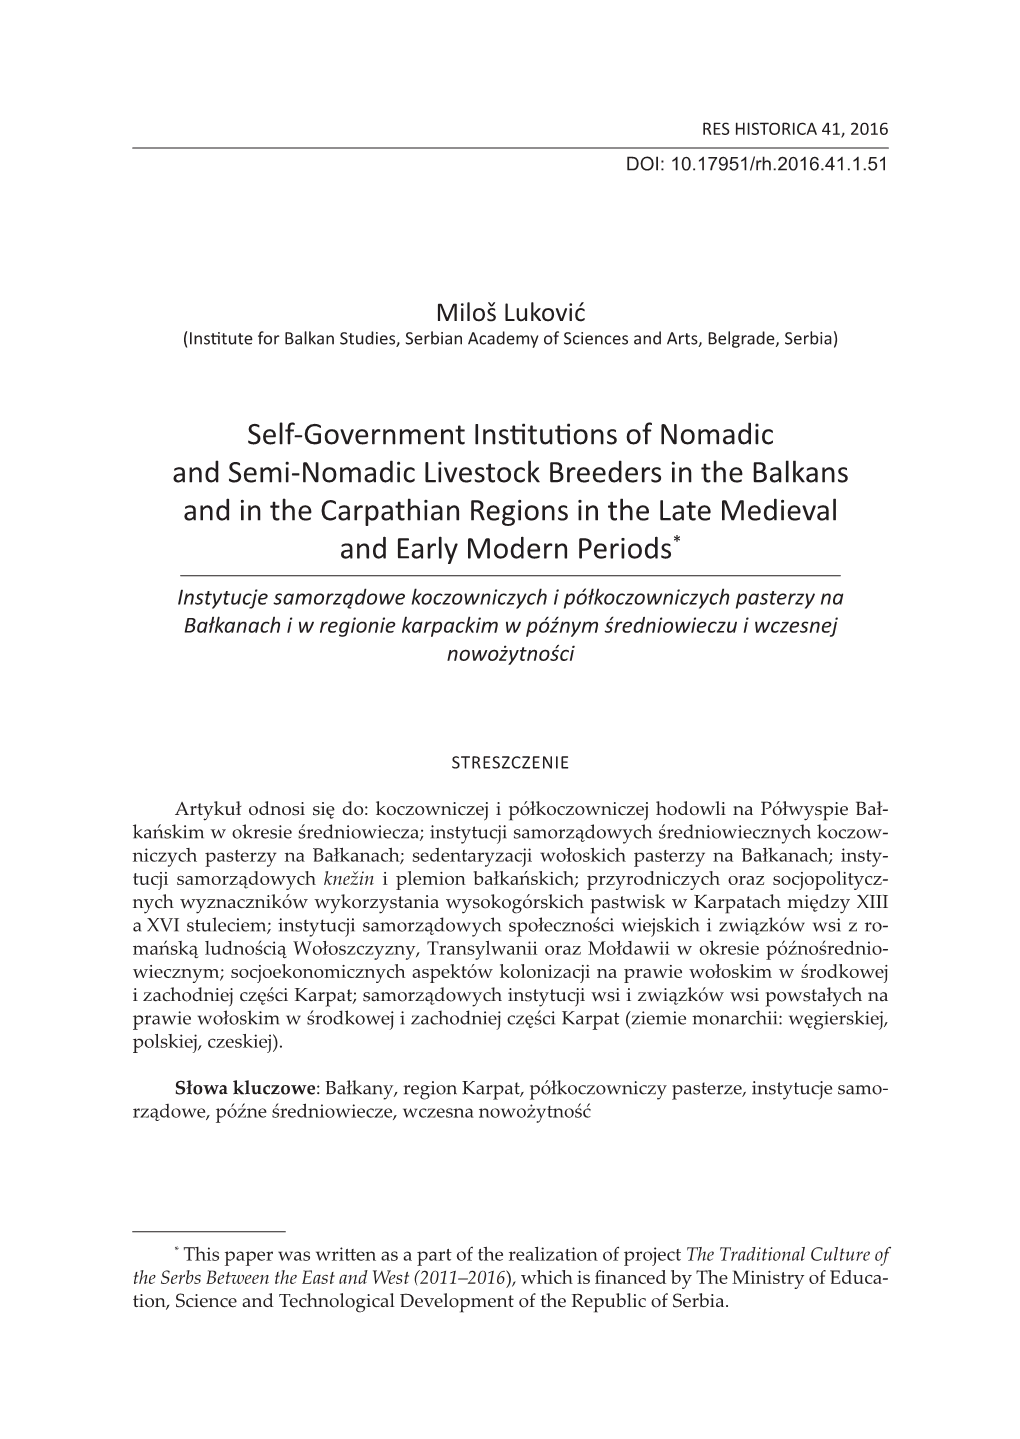 Self-Government Institutions of Nomadic and Semi